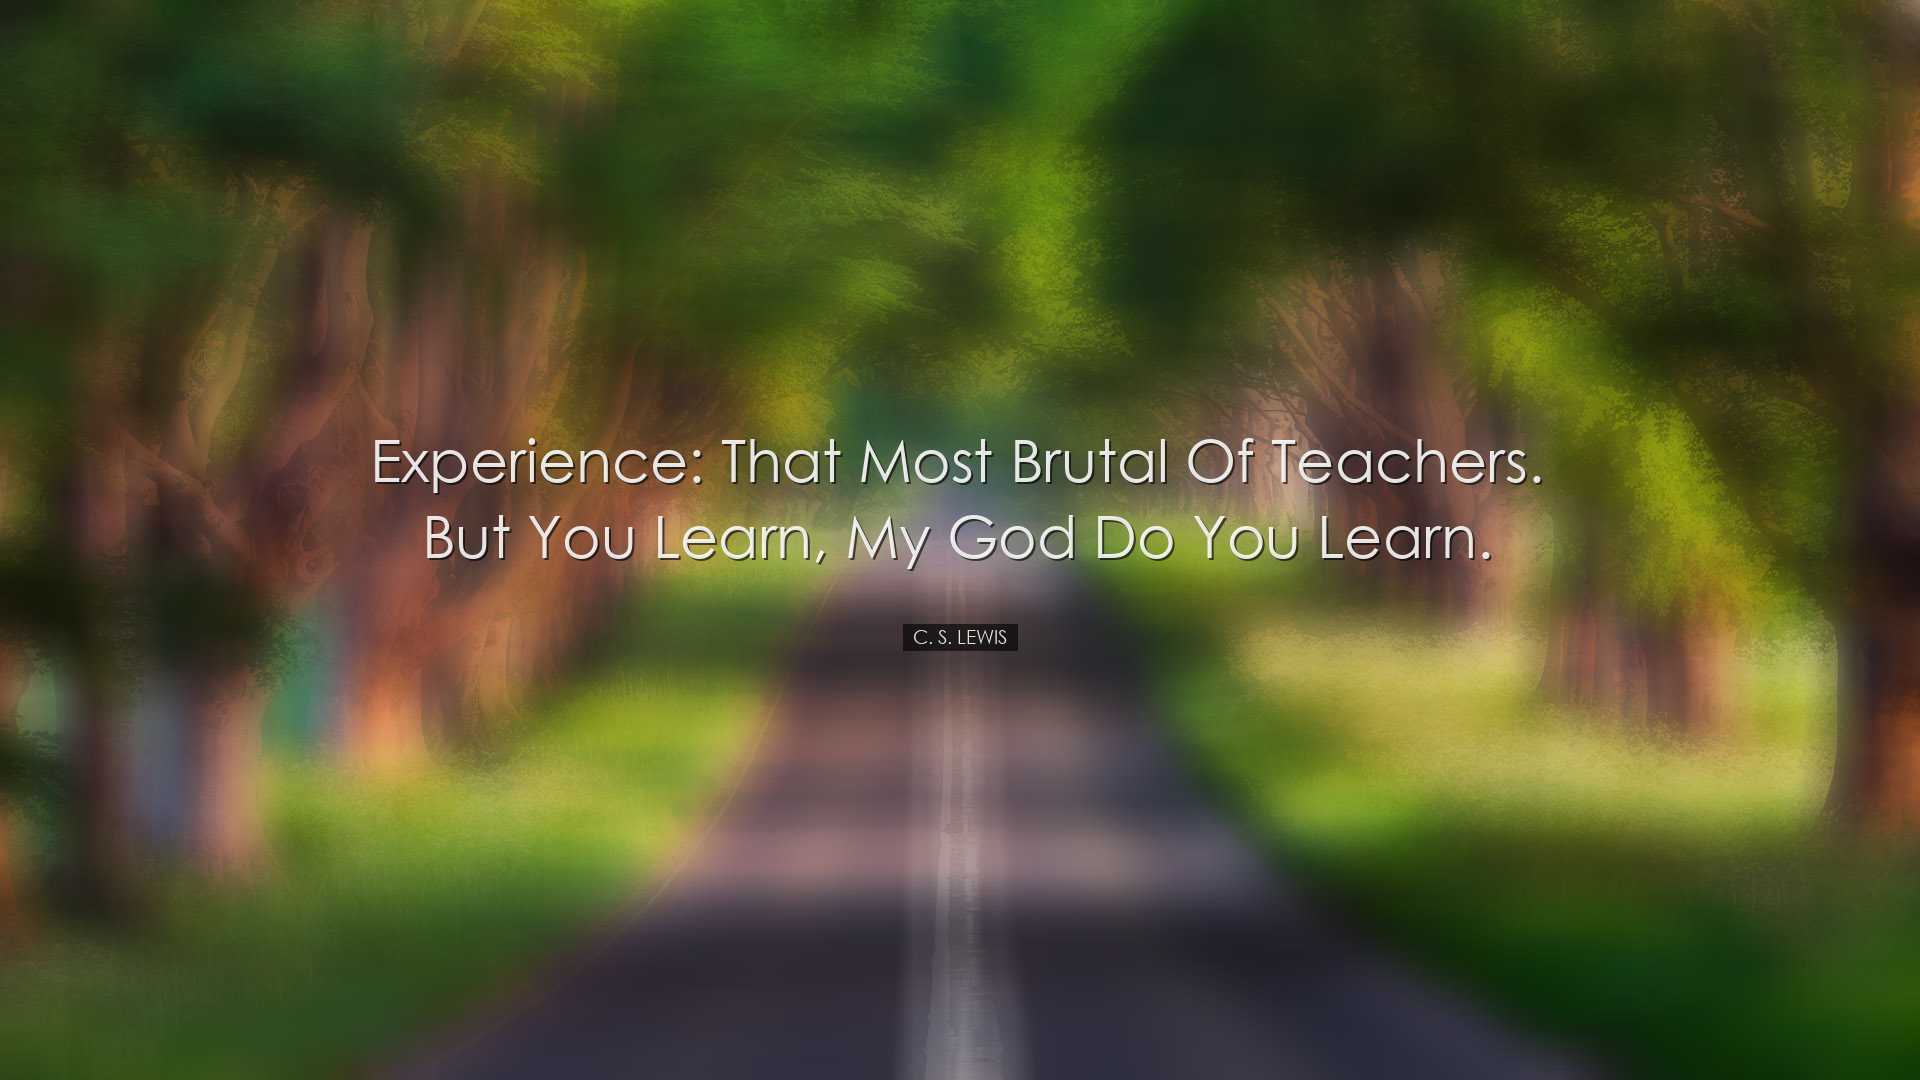 Experience: that most brutal of teachers. But you learn, my God do